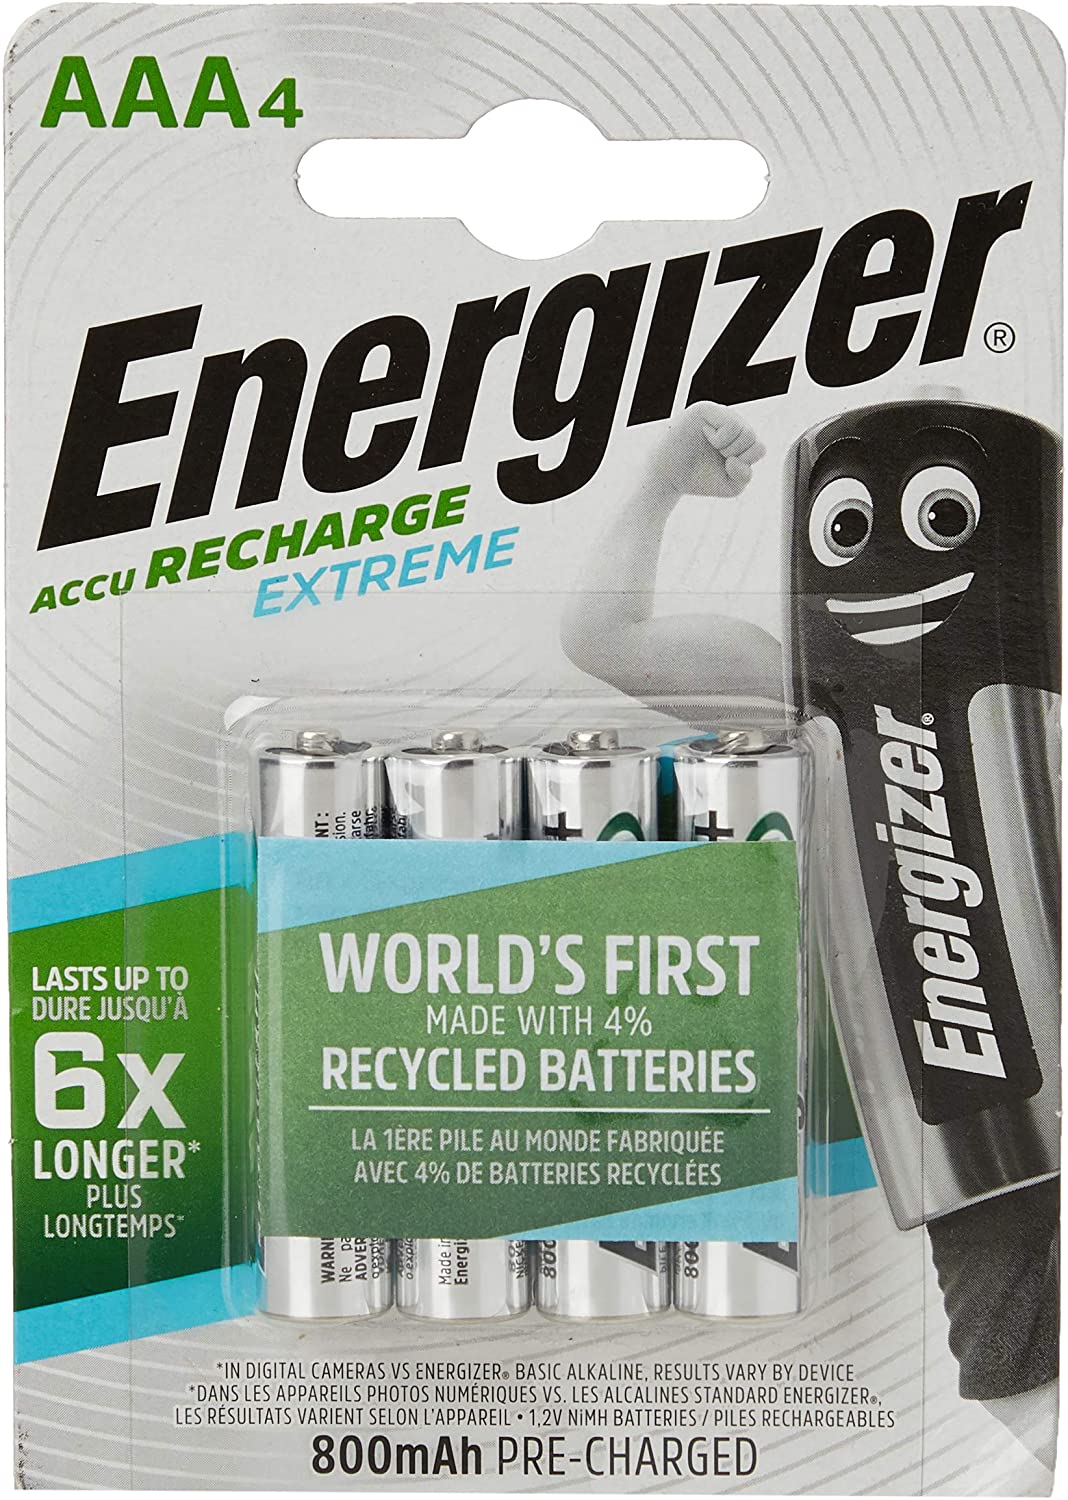 Energizer Accu Recharge 800MAh AAA Extreme 1.2V Batteries, 4 Batteries